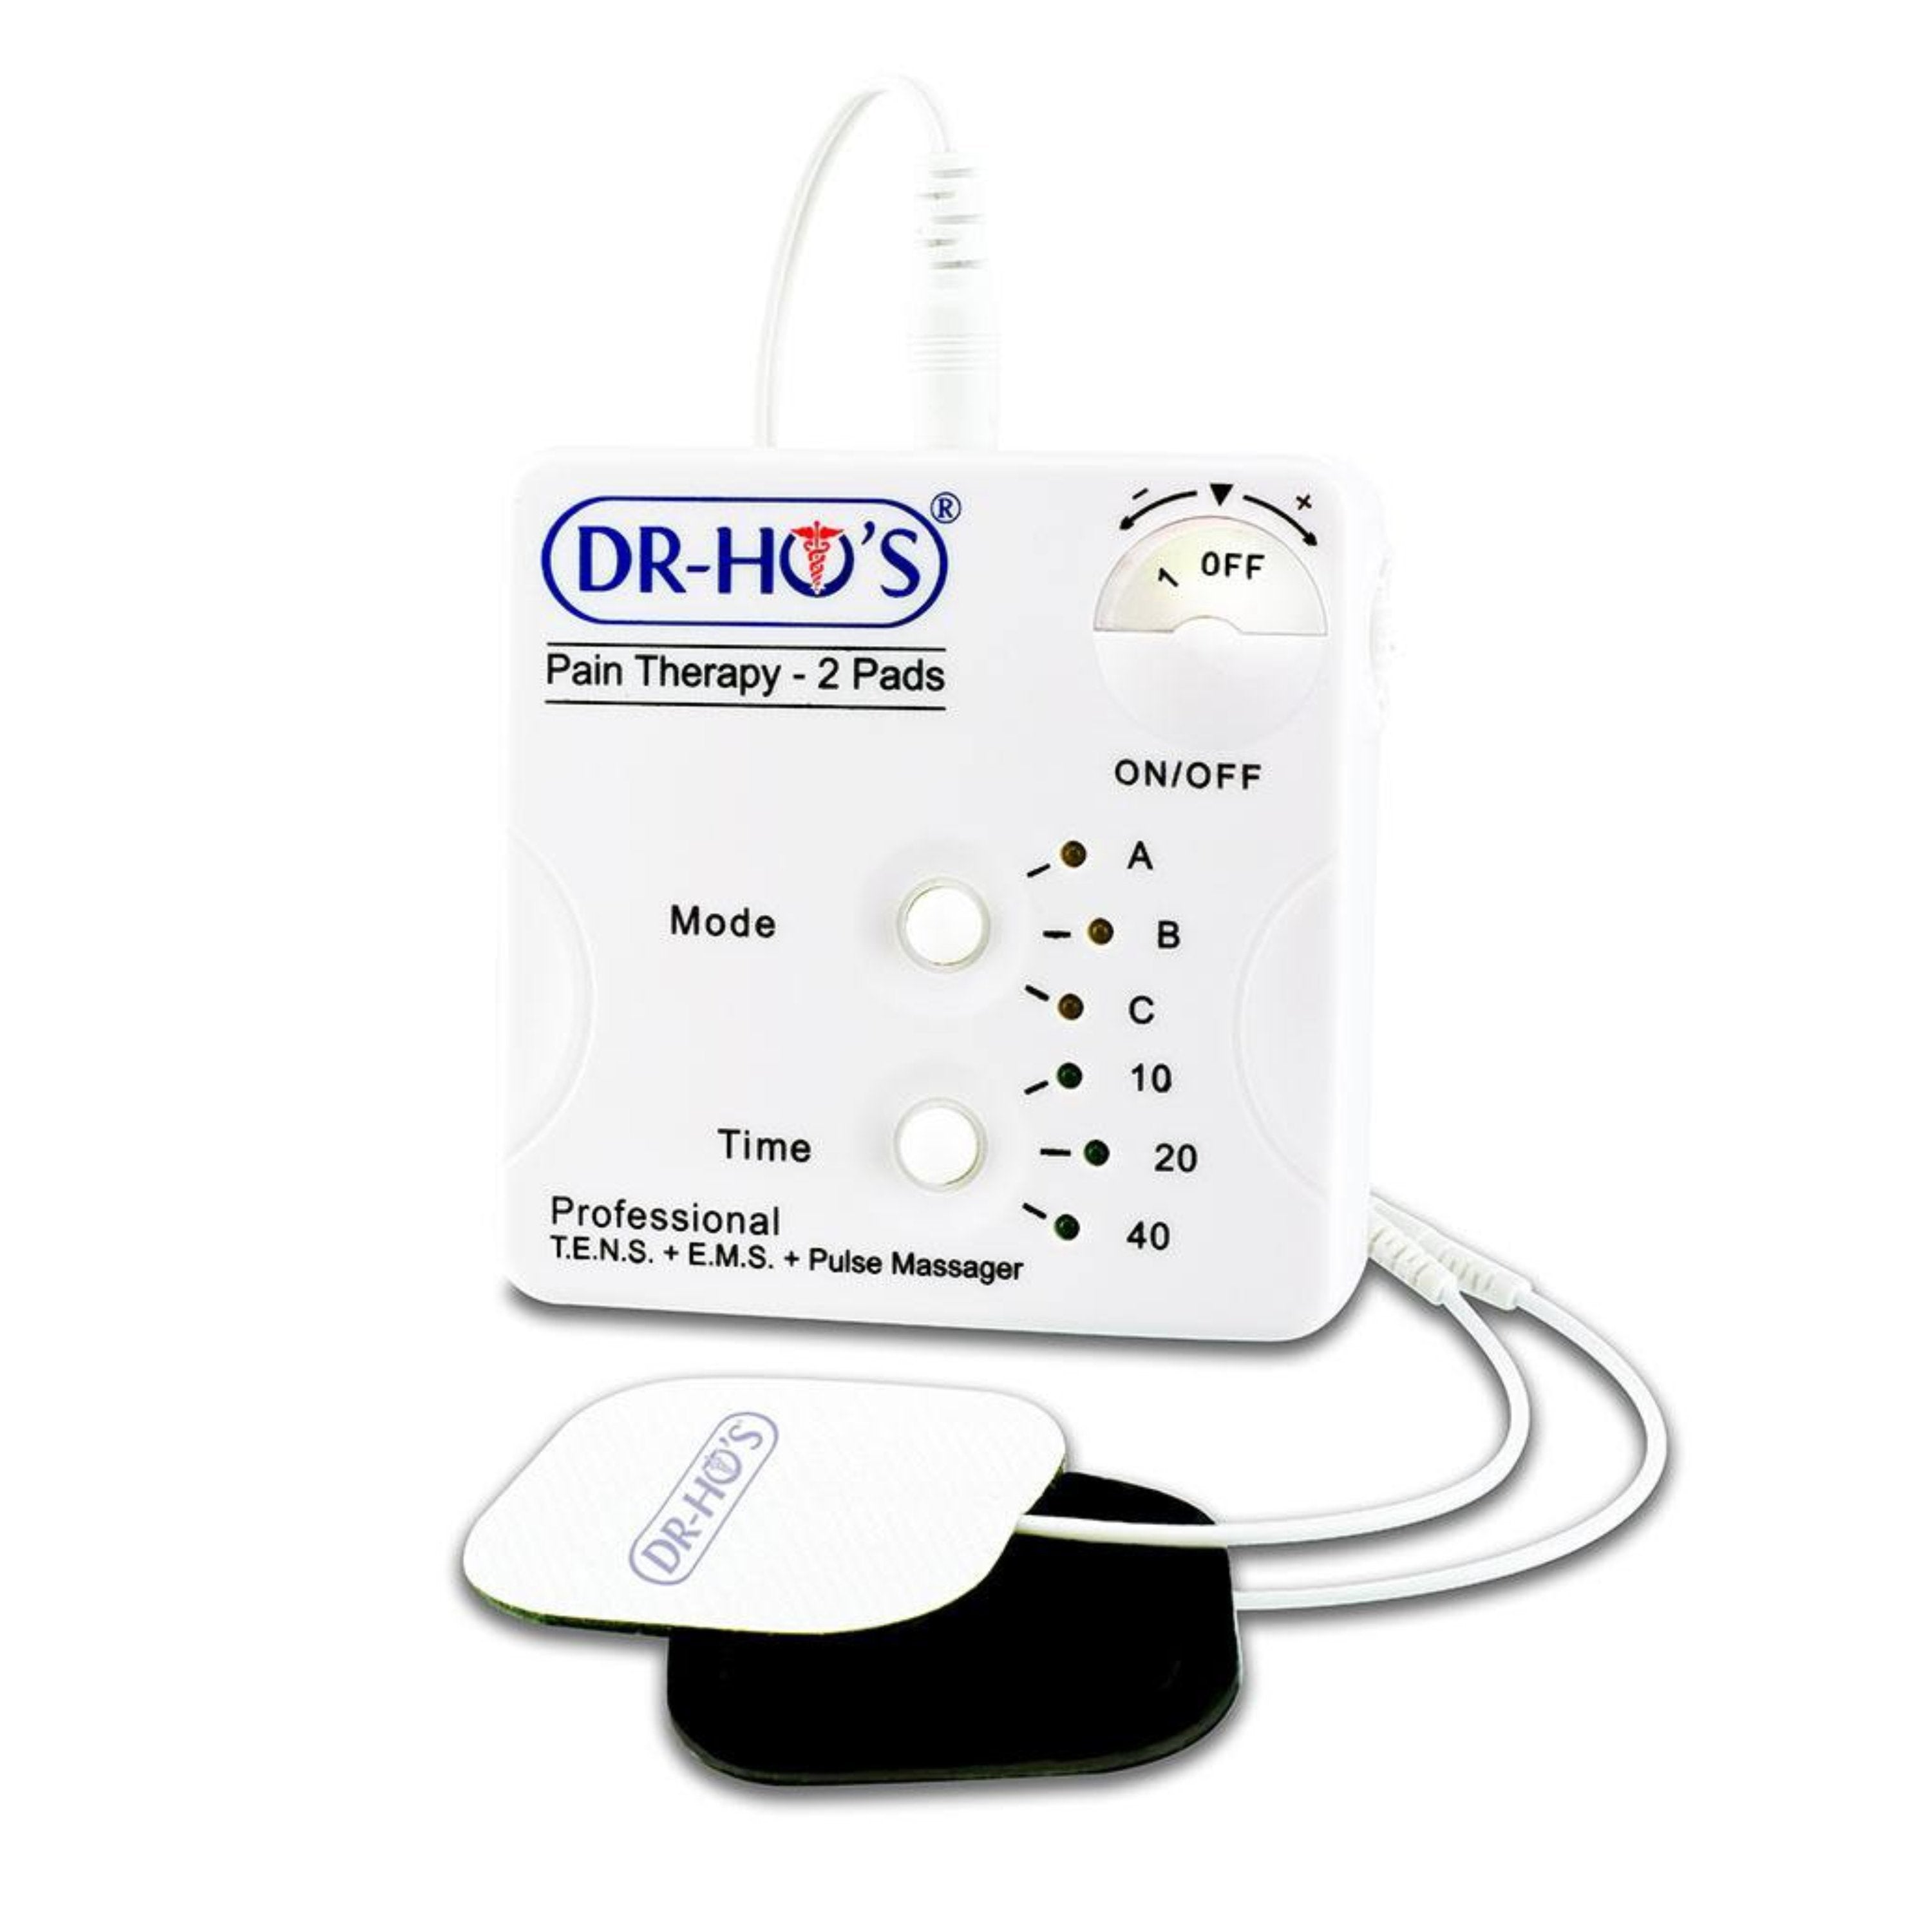 Pr/1 Dr Ho's Pain Therapy 2 Pad T.E.N.S. System